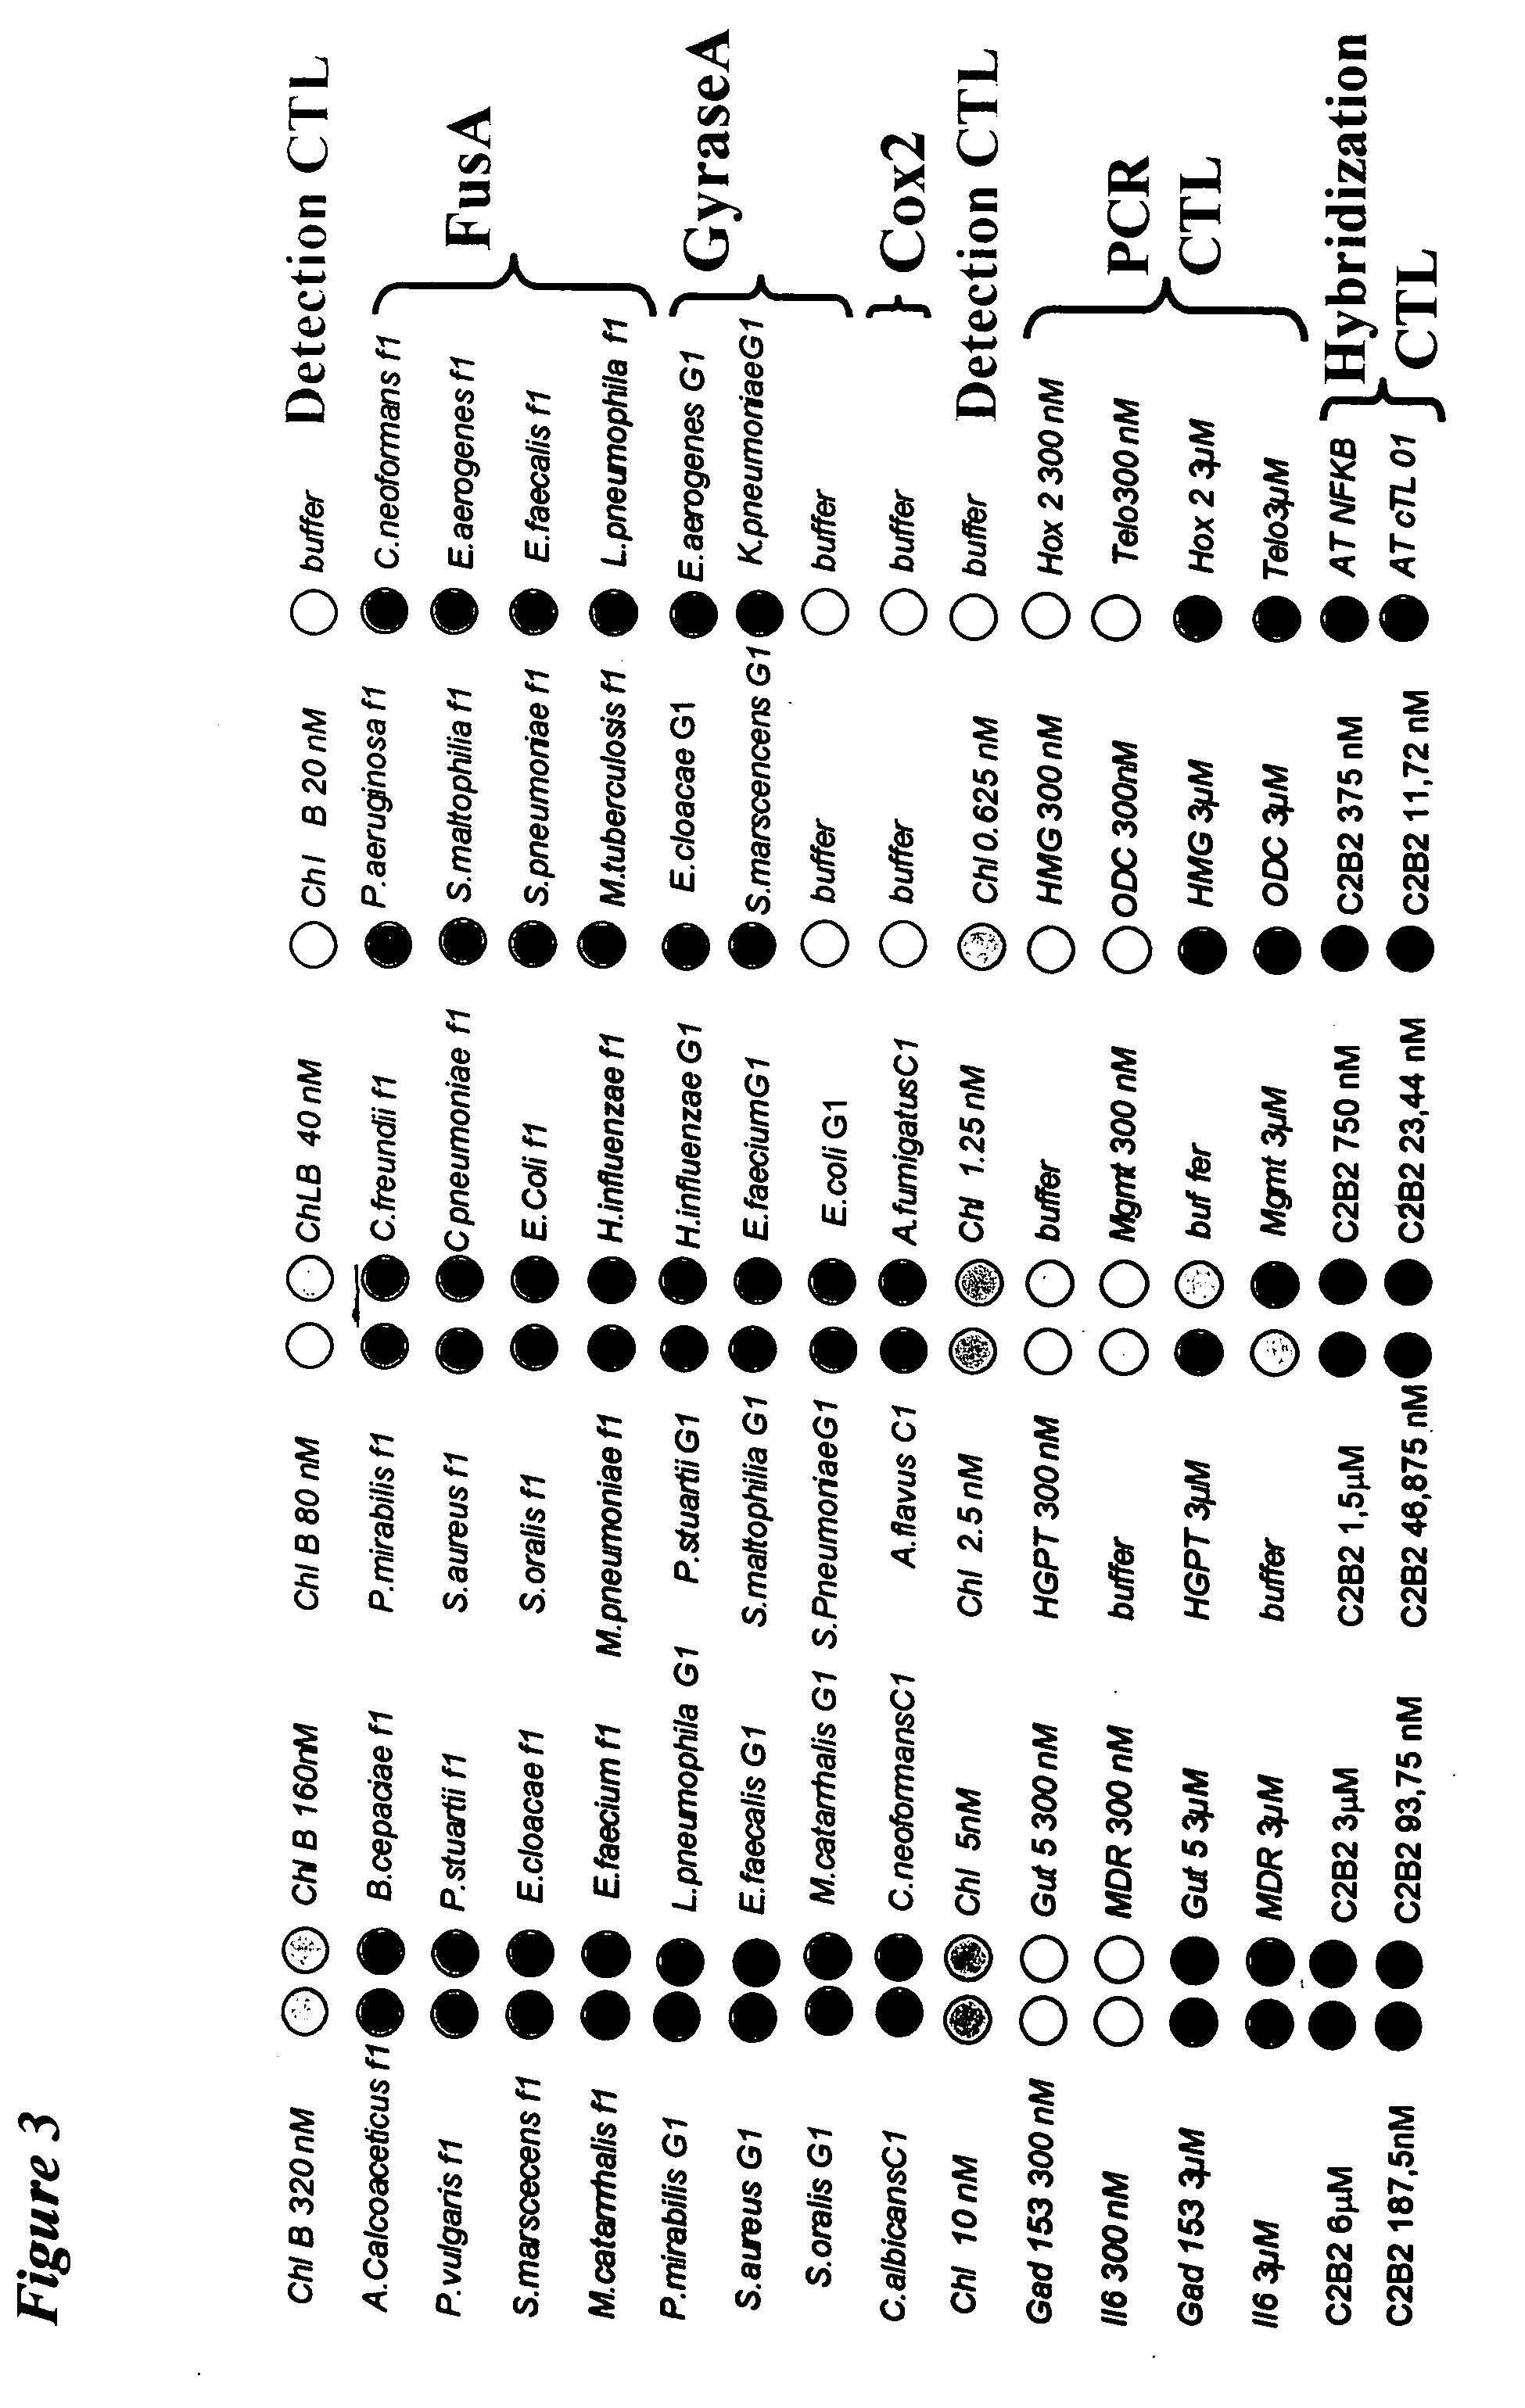 Method and kit for the detection and/or quantification of homologous nucleotide sequences on arrays